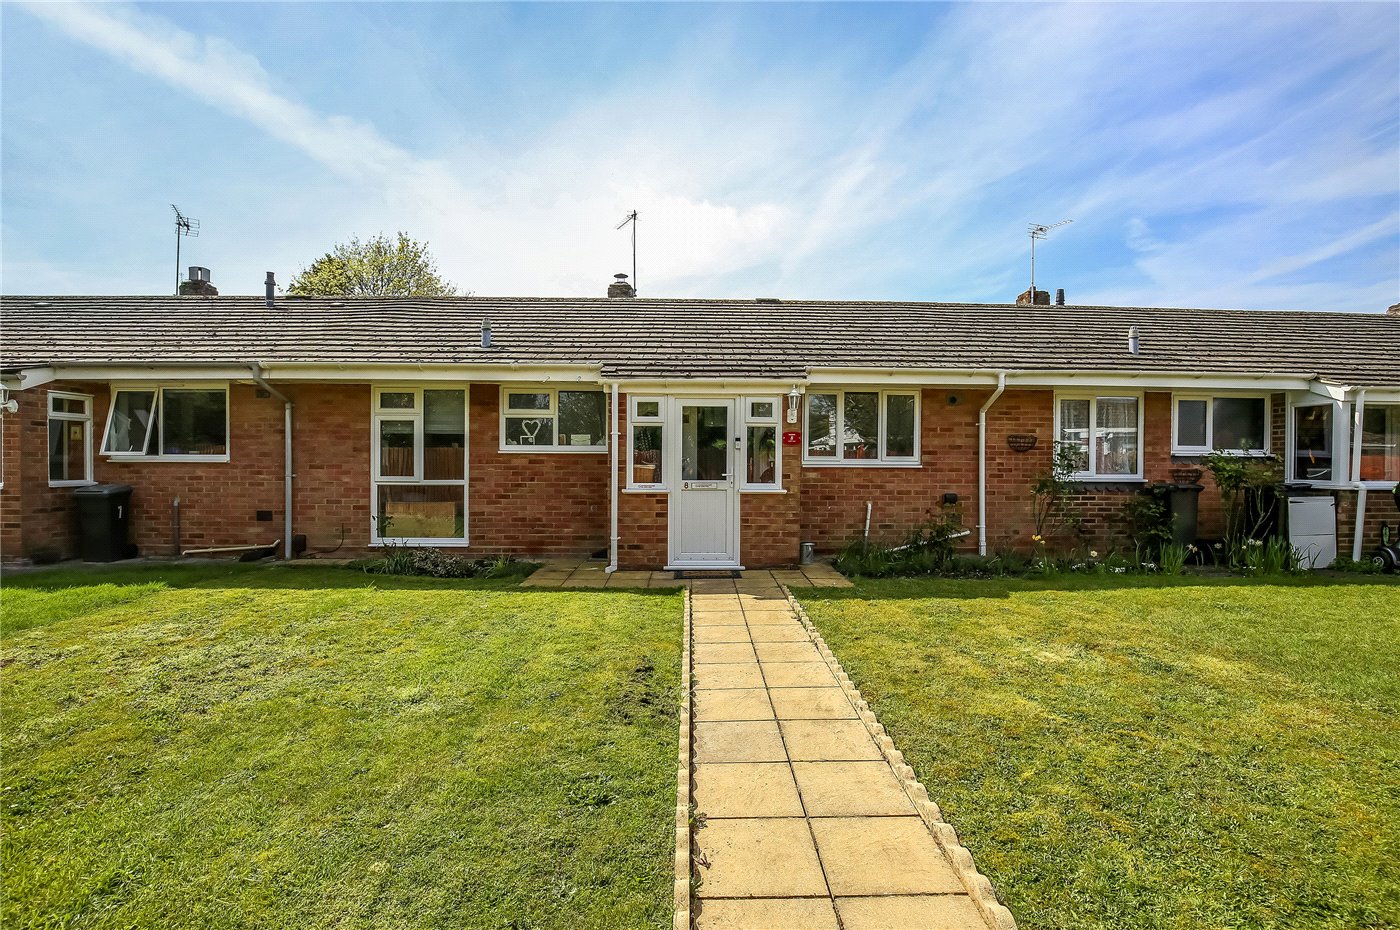 Ashley Close, Winchester, Hampshire, SO22 2 bedroom bungalow in Winchester